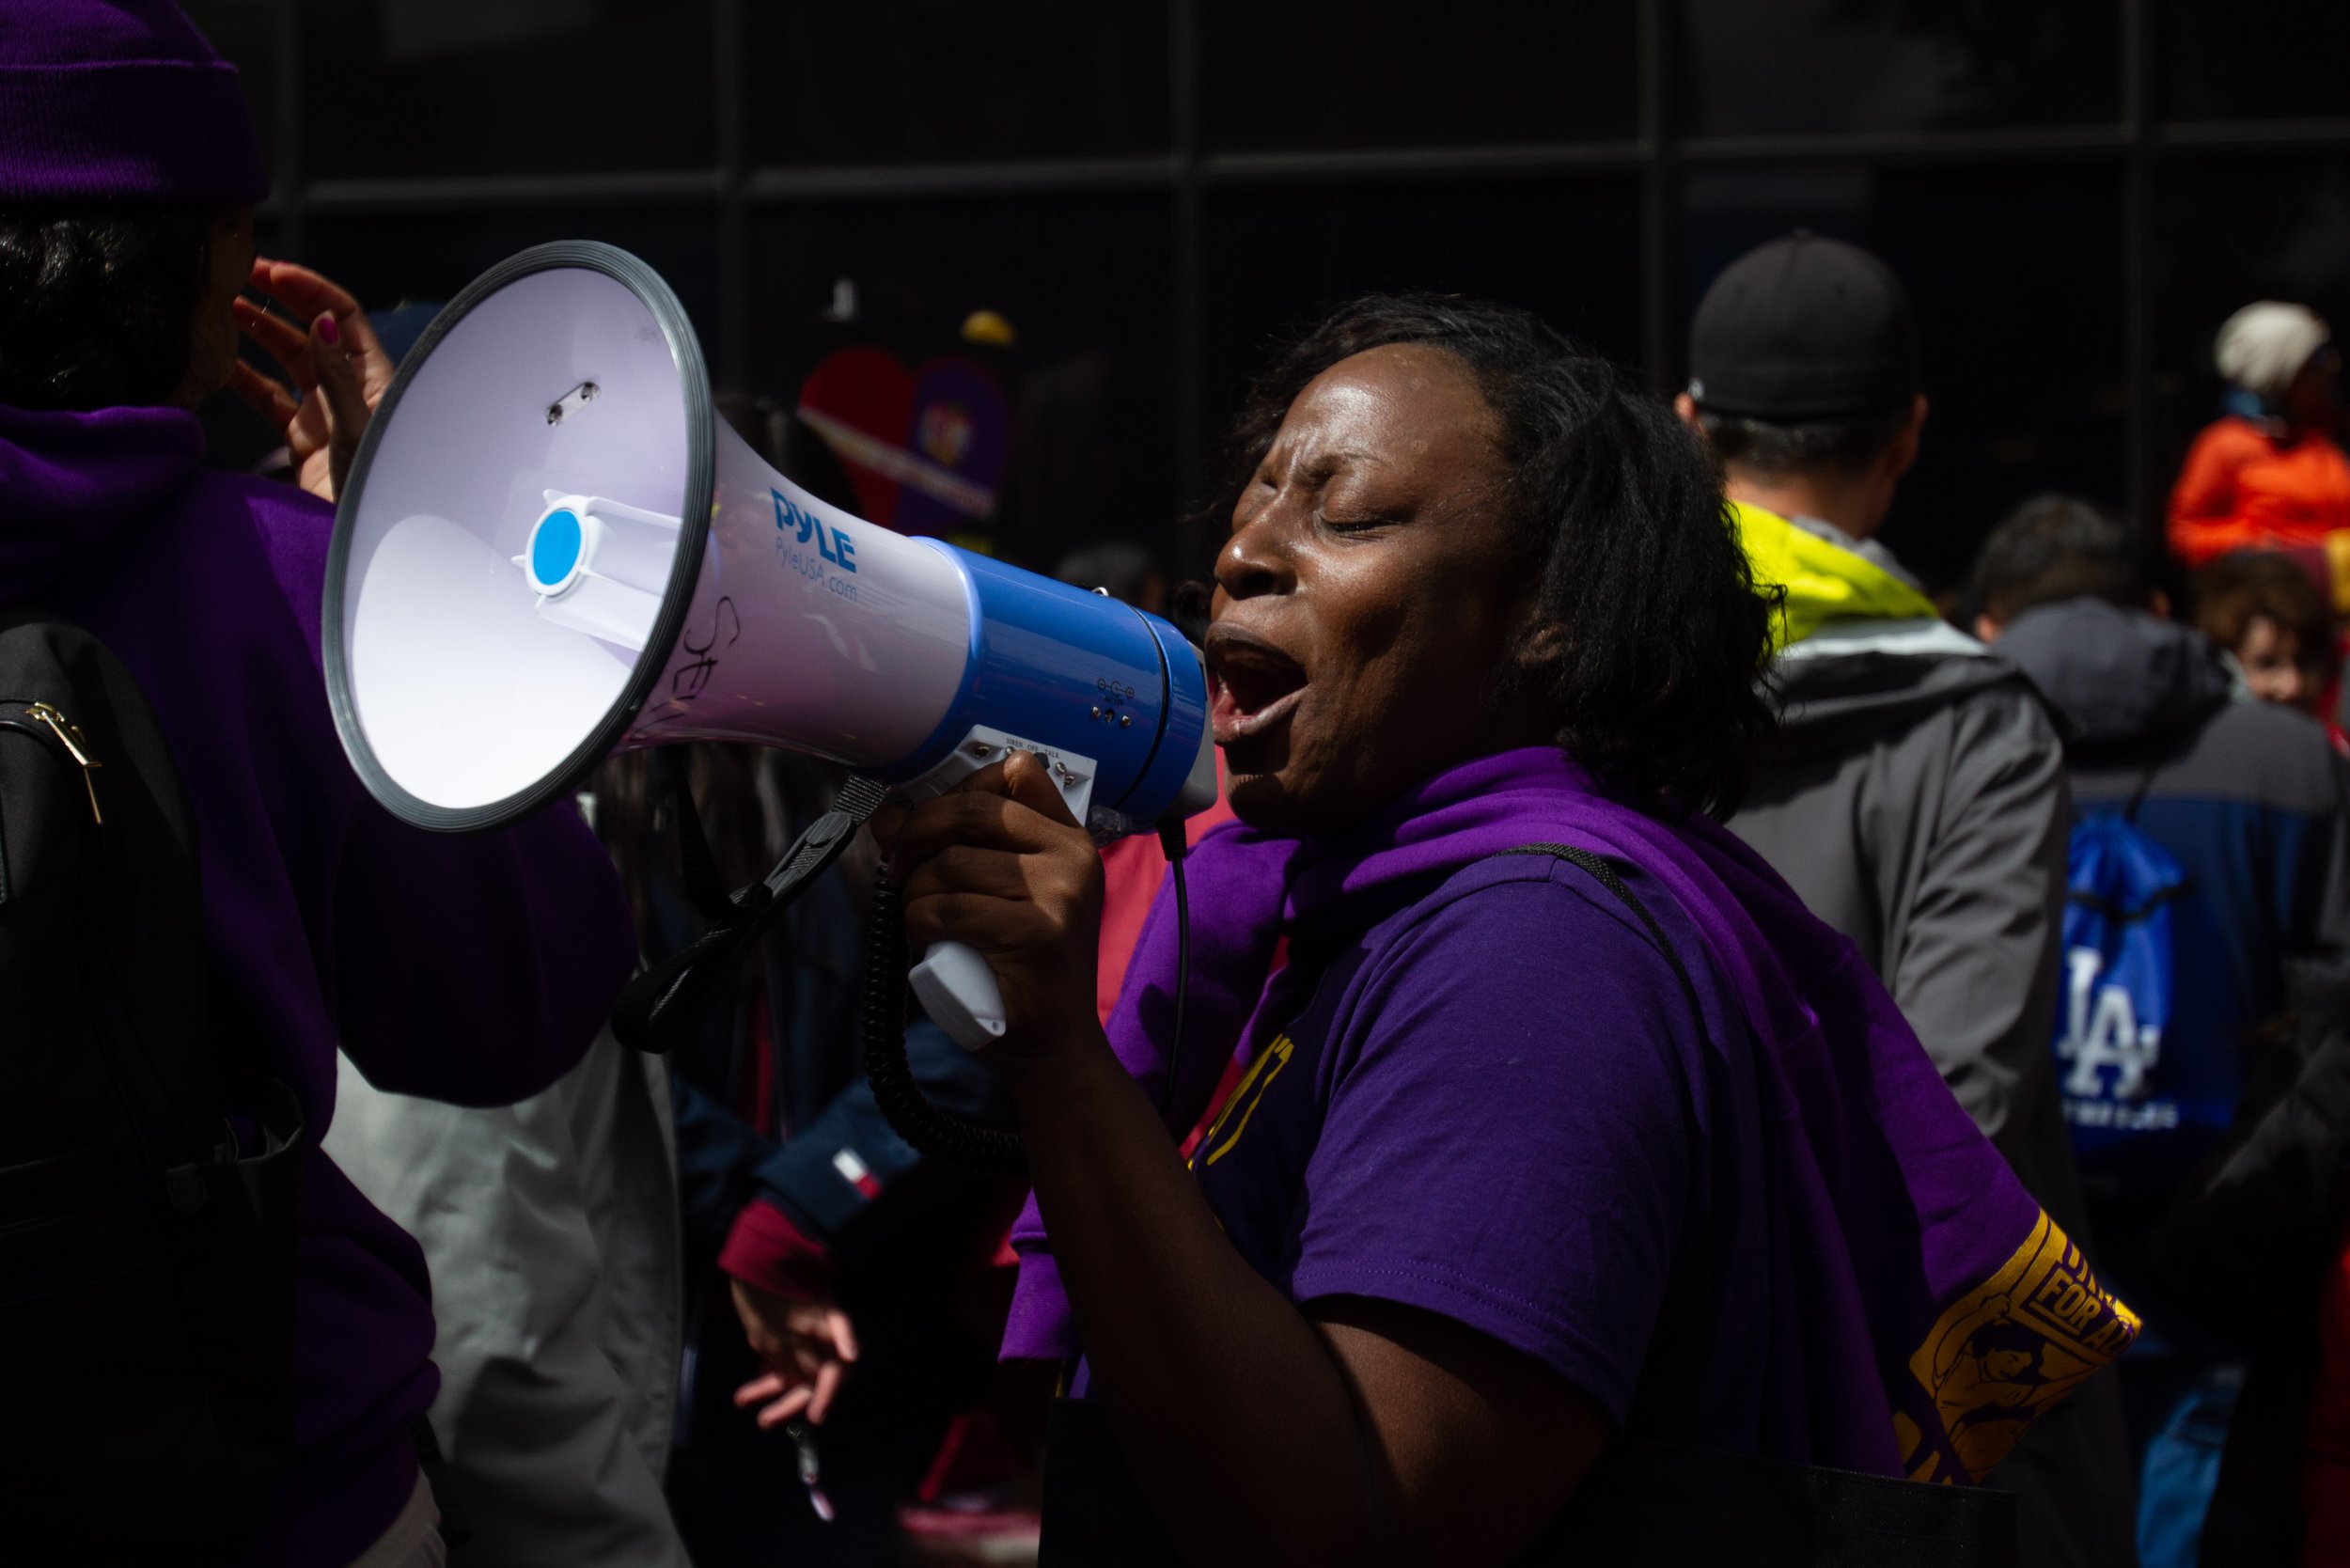  Linda, an organizer from SEIU Local 99, uses her voice in the protest held on Tuesday, March 21, 2023 at the LAUSD headquarters in Downtown L.A. The strike is being lead by SEIU Local 99 members protesting unfair labor practices. (Baleigh O’Brien | 